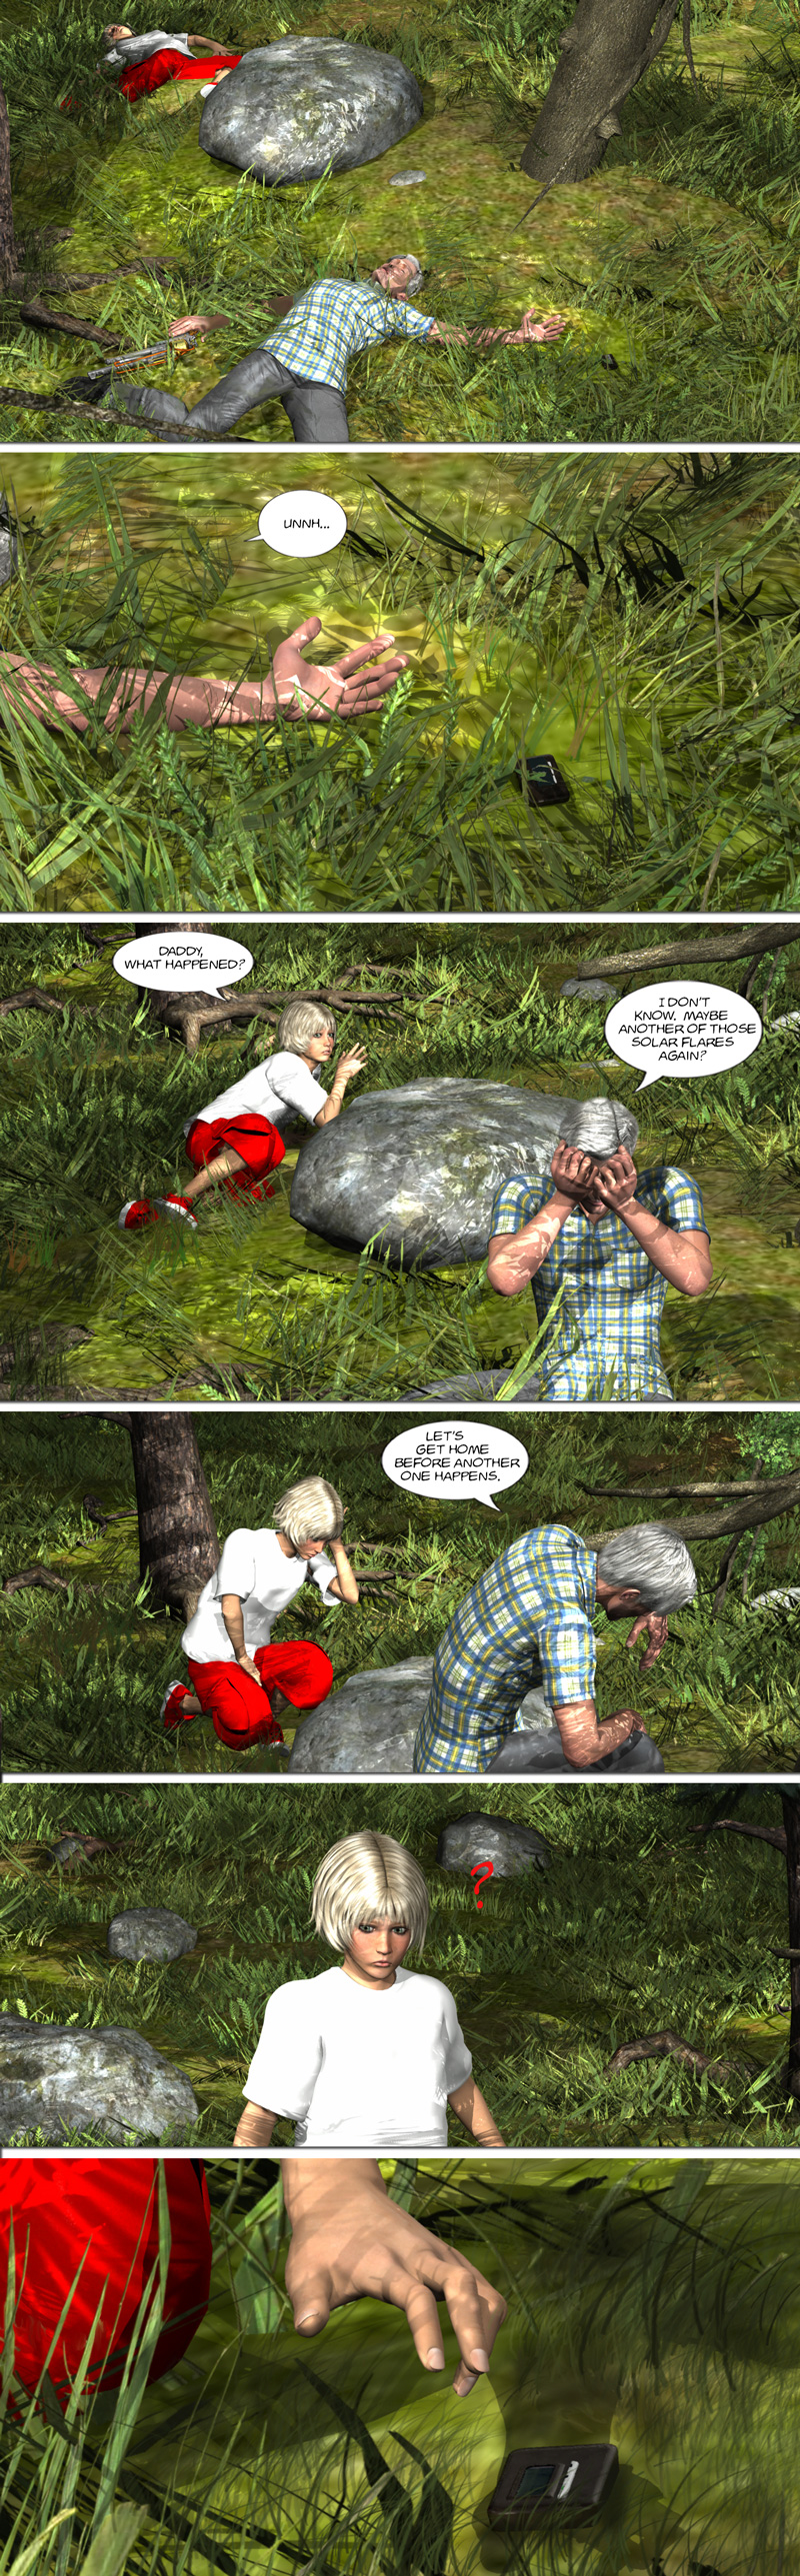 Chapter 10, page 27 – Little Tirin finds something interesting